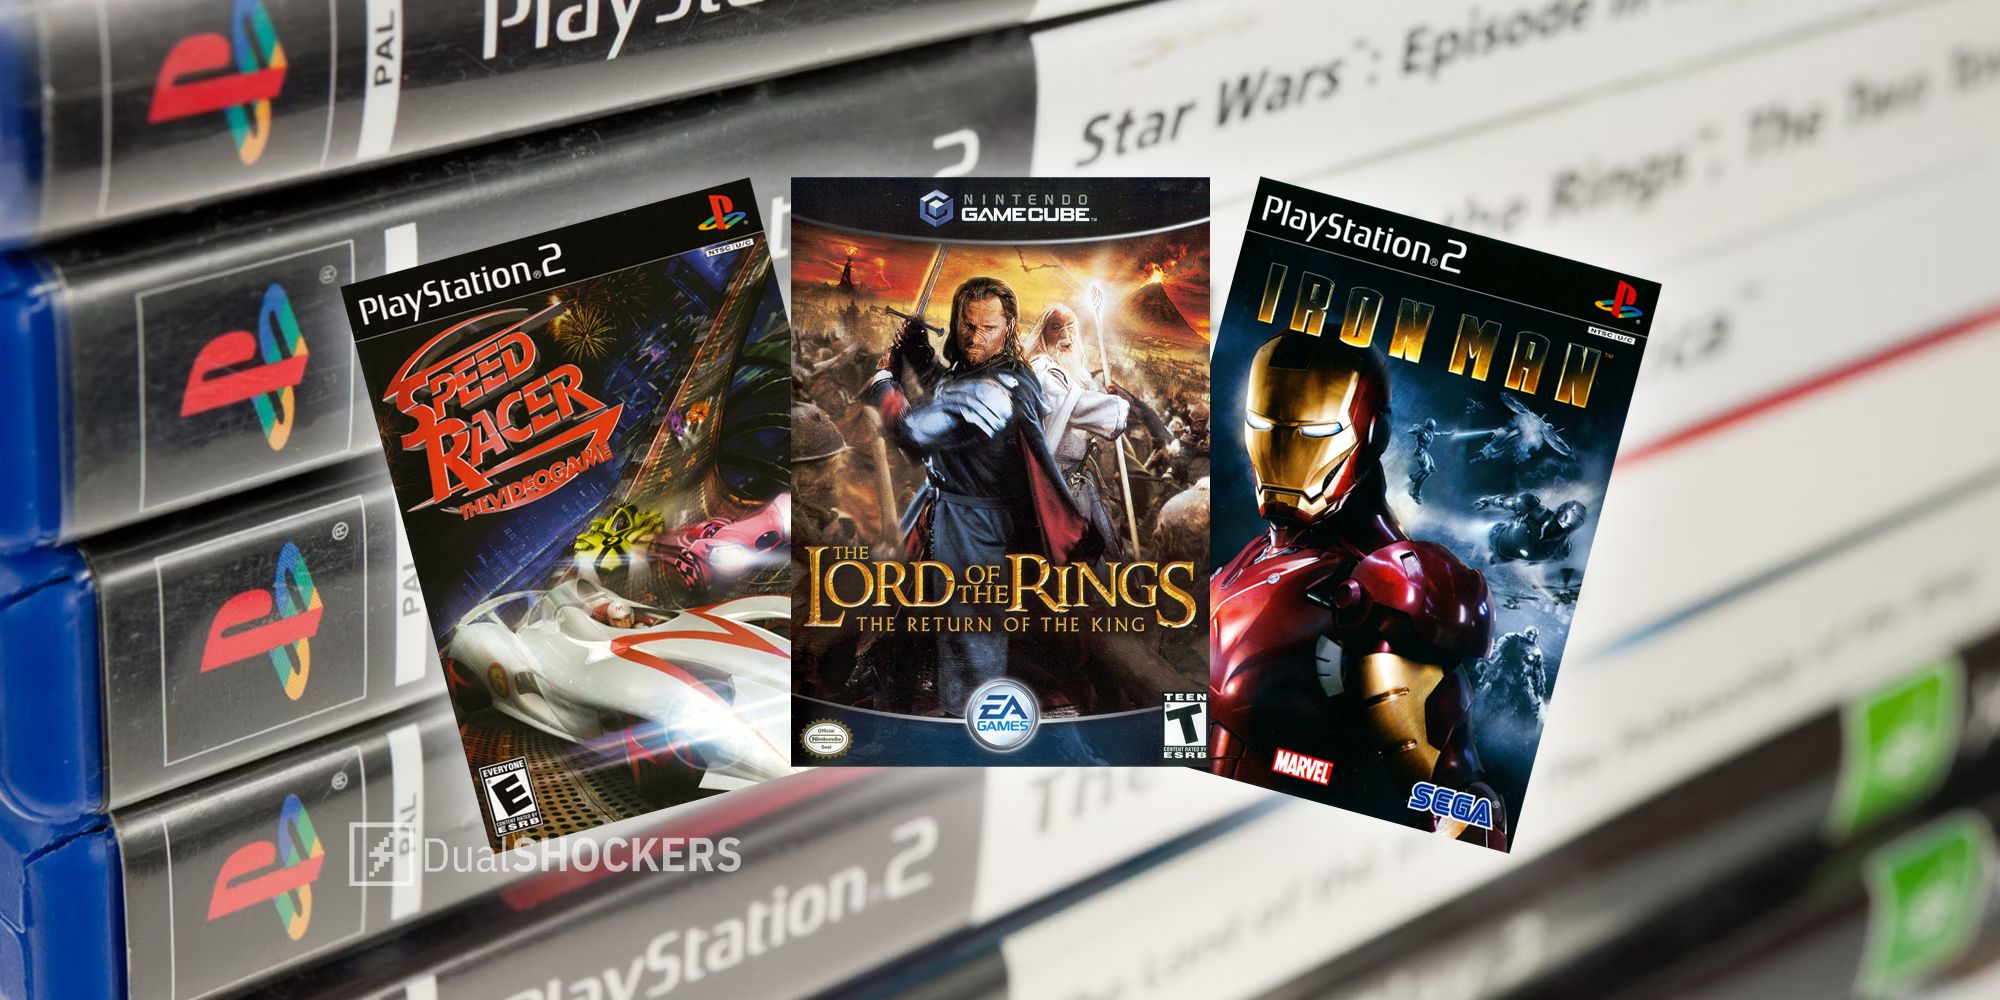 Lord of the Rings Return of the King, Speed Racer, 2008 Iron Man PS2 games